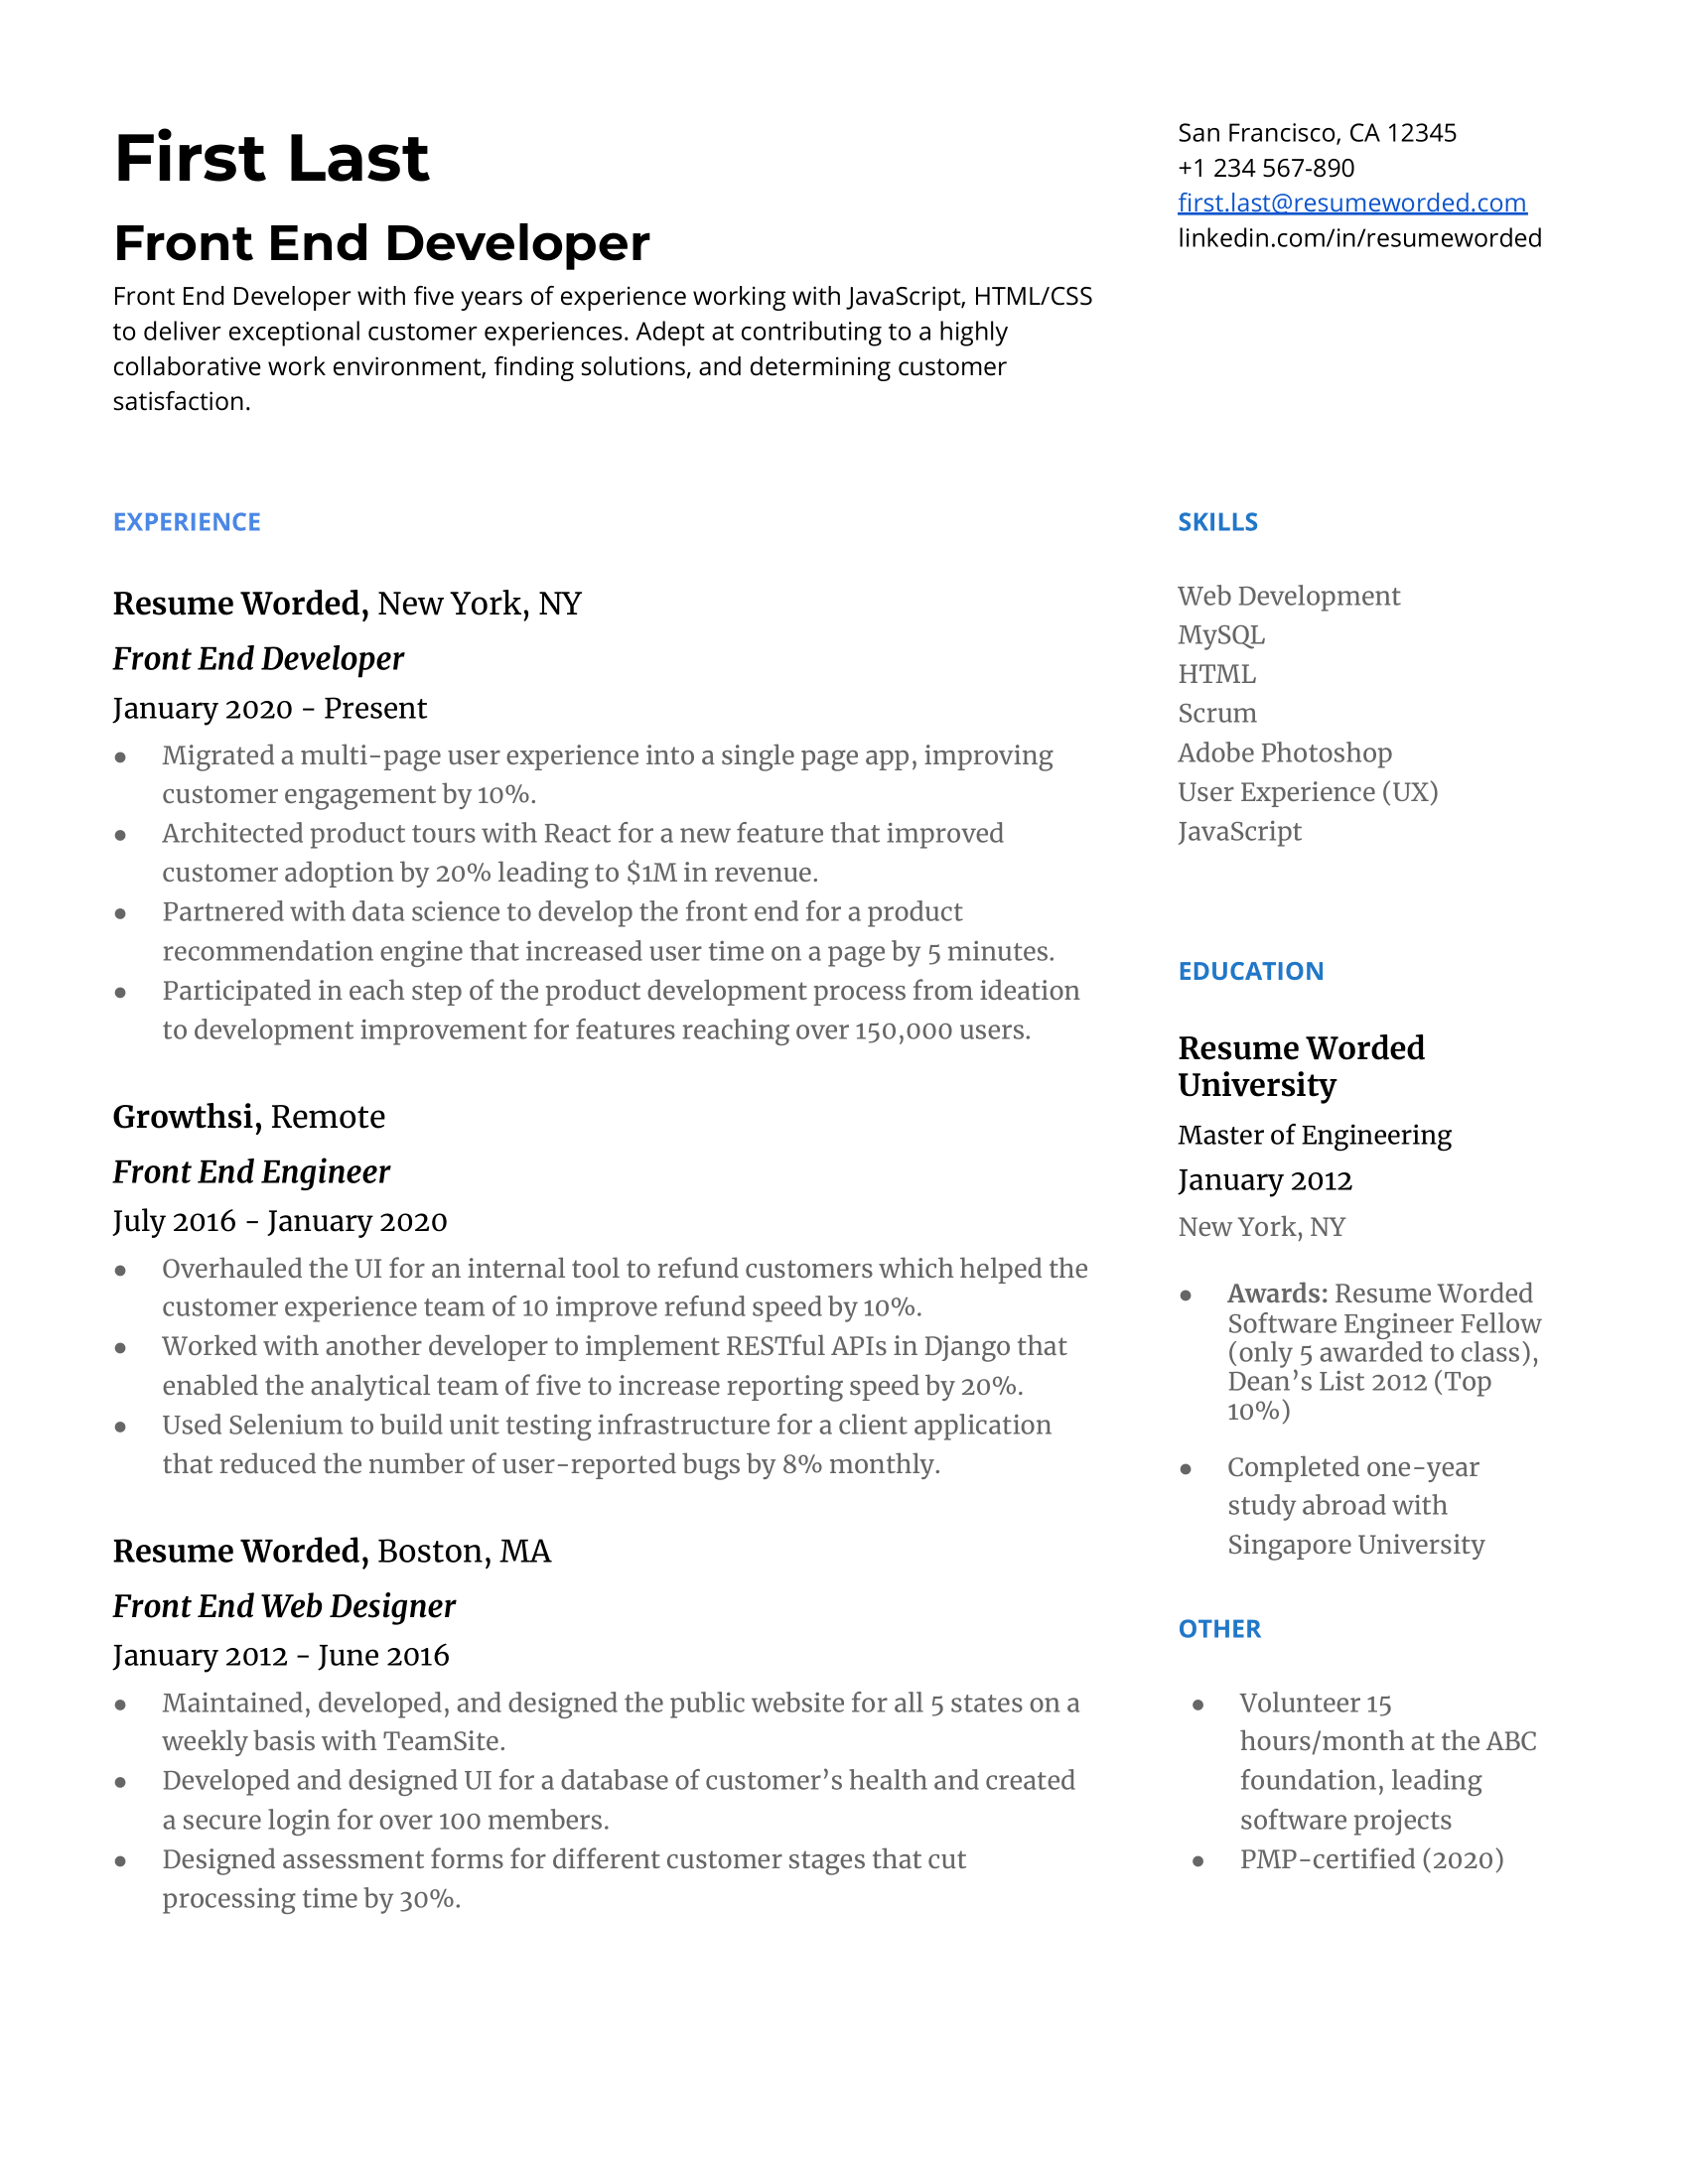 A front end developer resume template focused on technical skills.